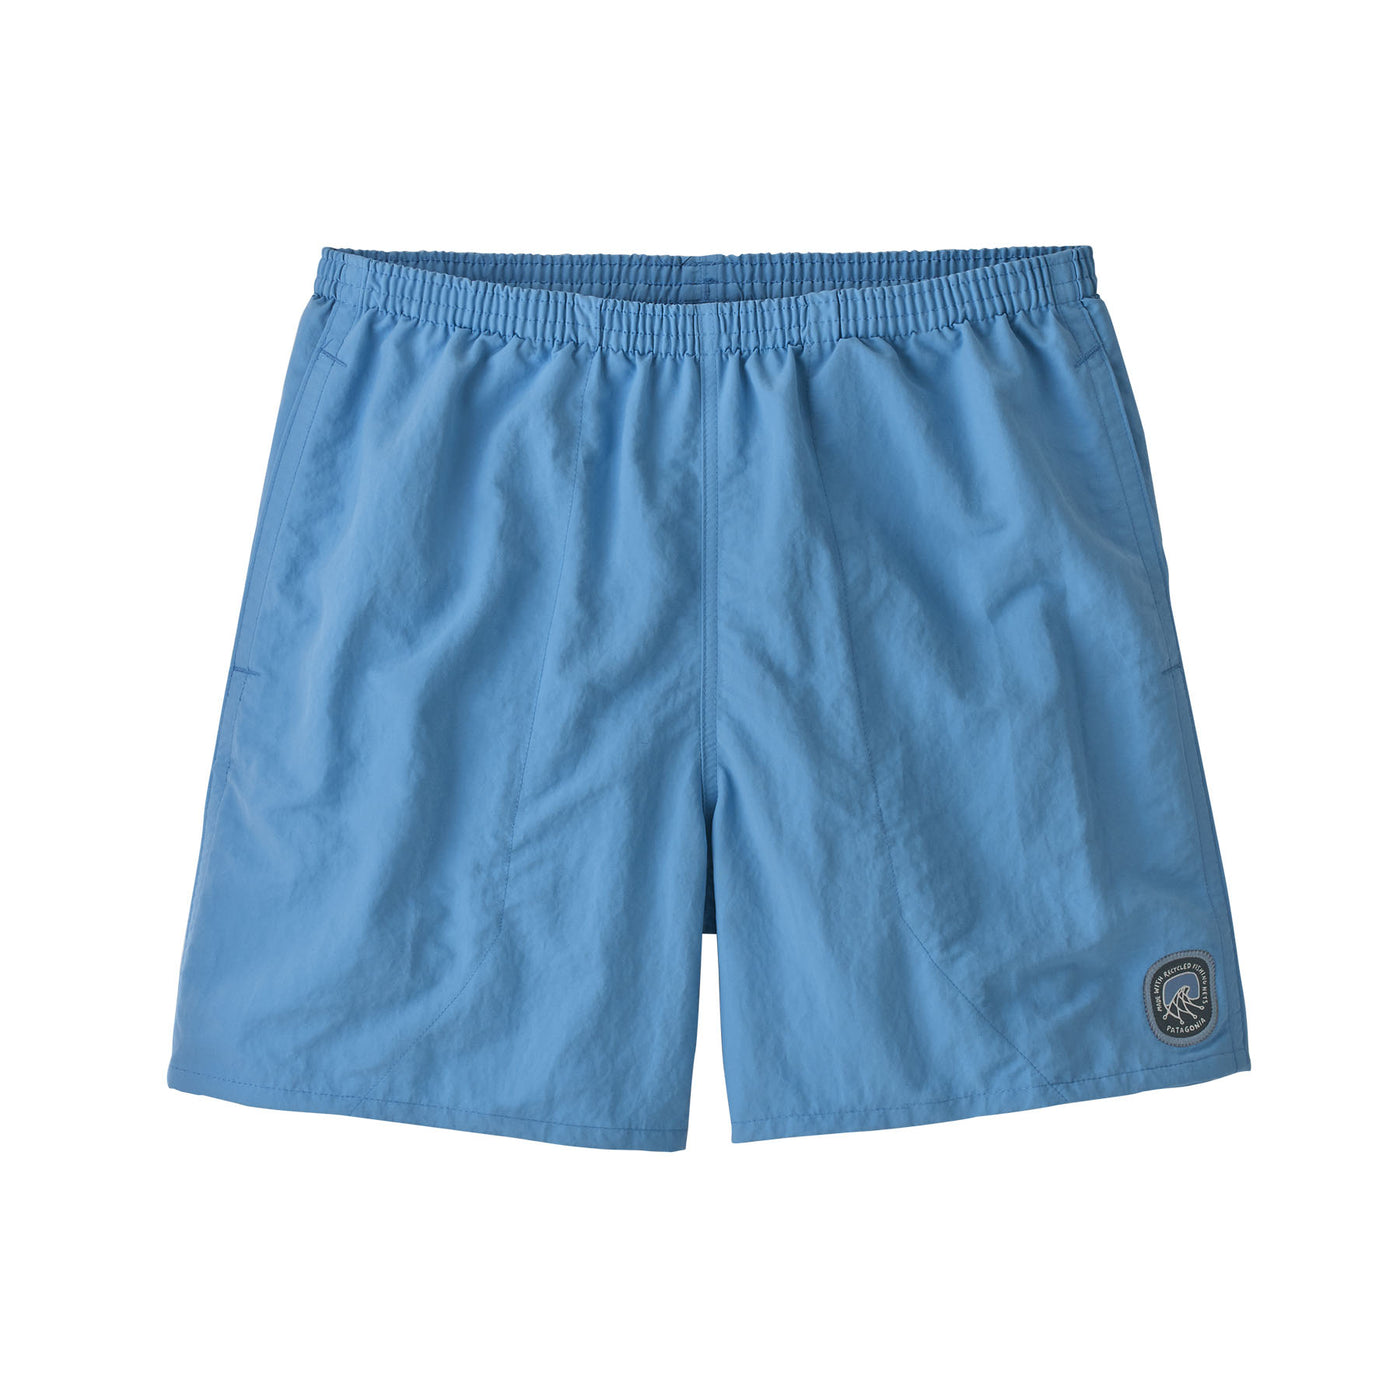 Patagonia Men's Baggies Shorts - 5"-MENS CLOTHING-CPLA Clean Currents Patch: Lago Blue-XS-Kevin's Fine Outdoor Gear & Apparel